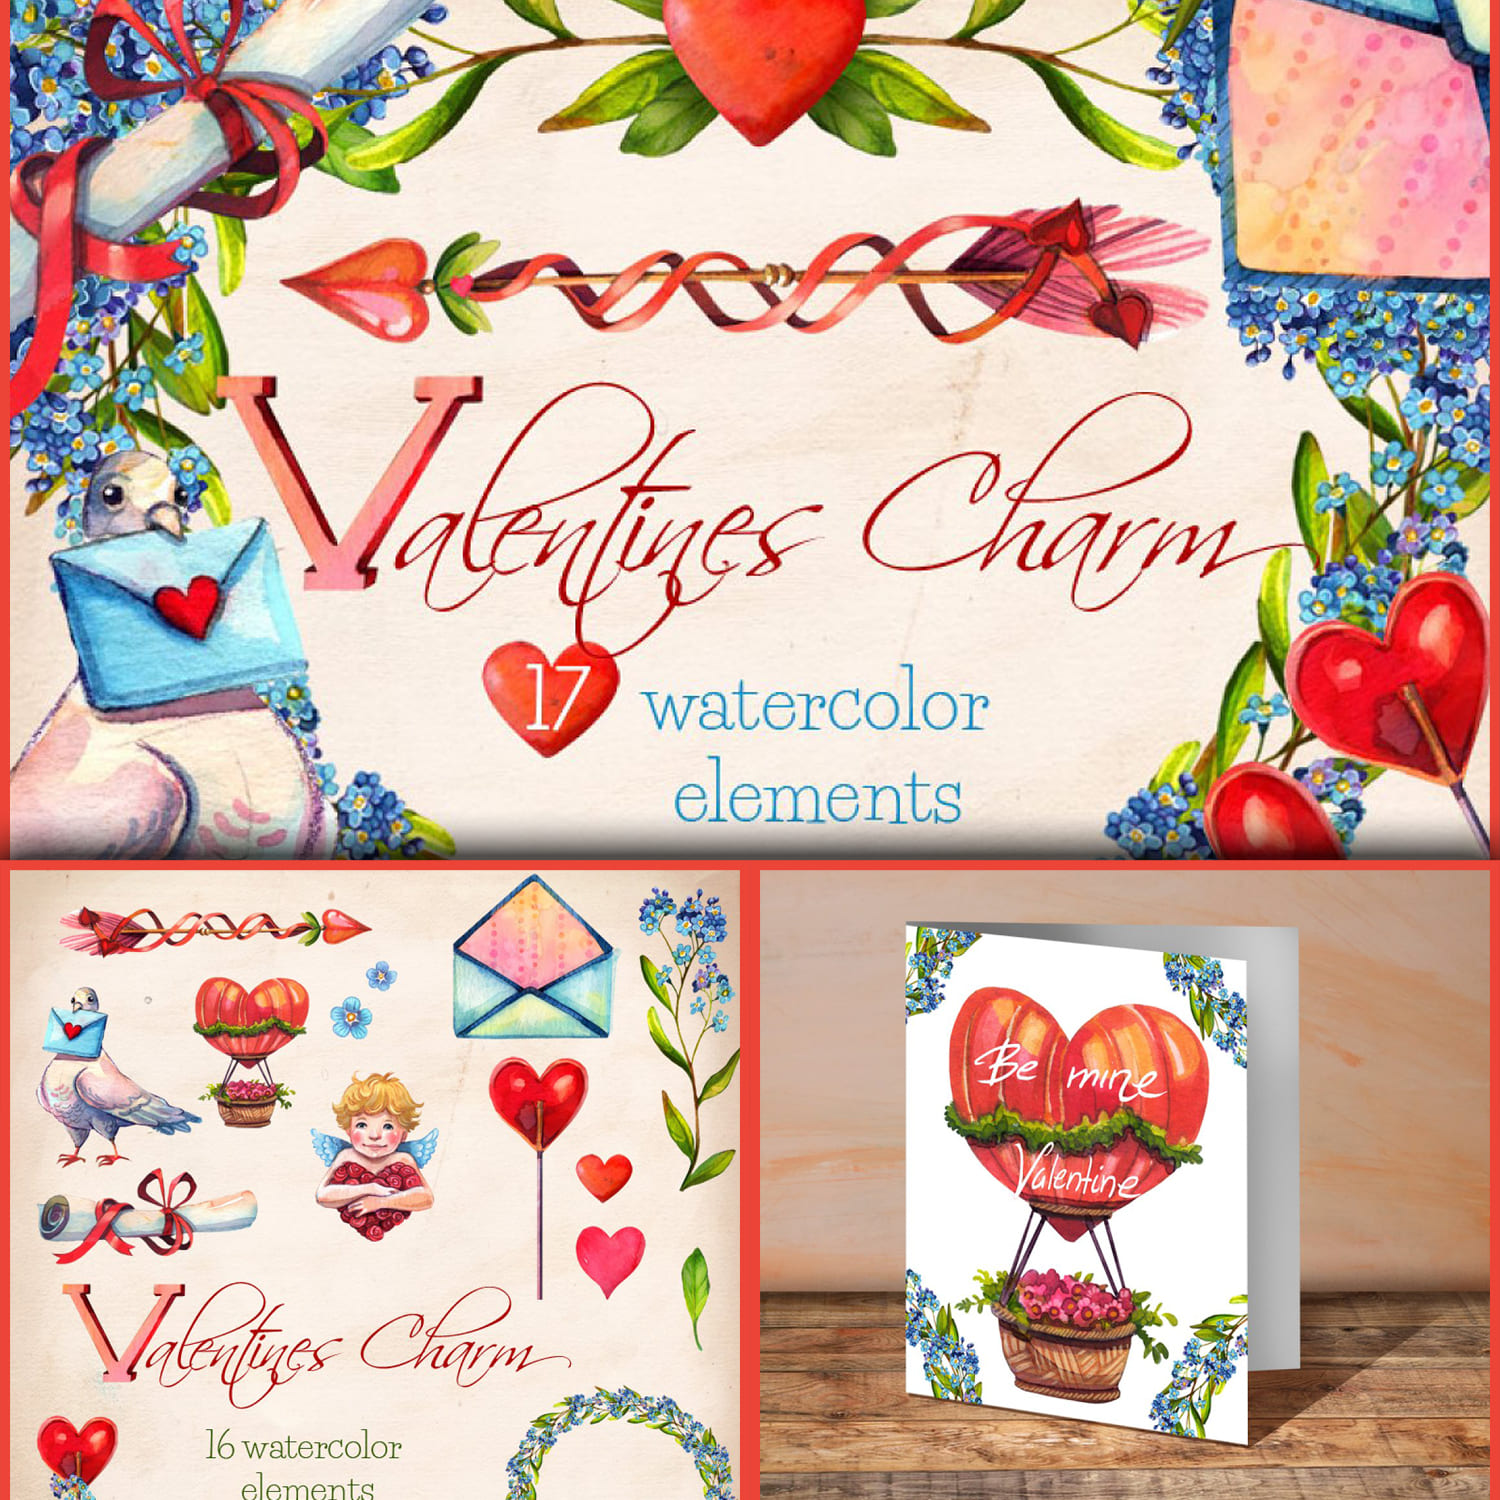 Three images with illustrations for Valentine's Day.